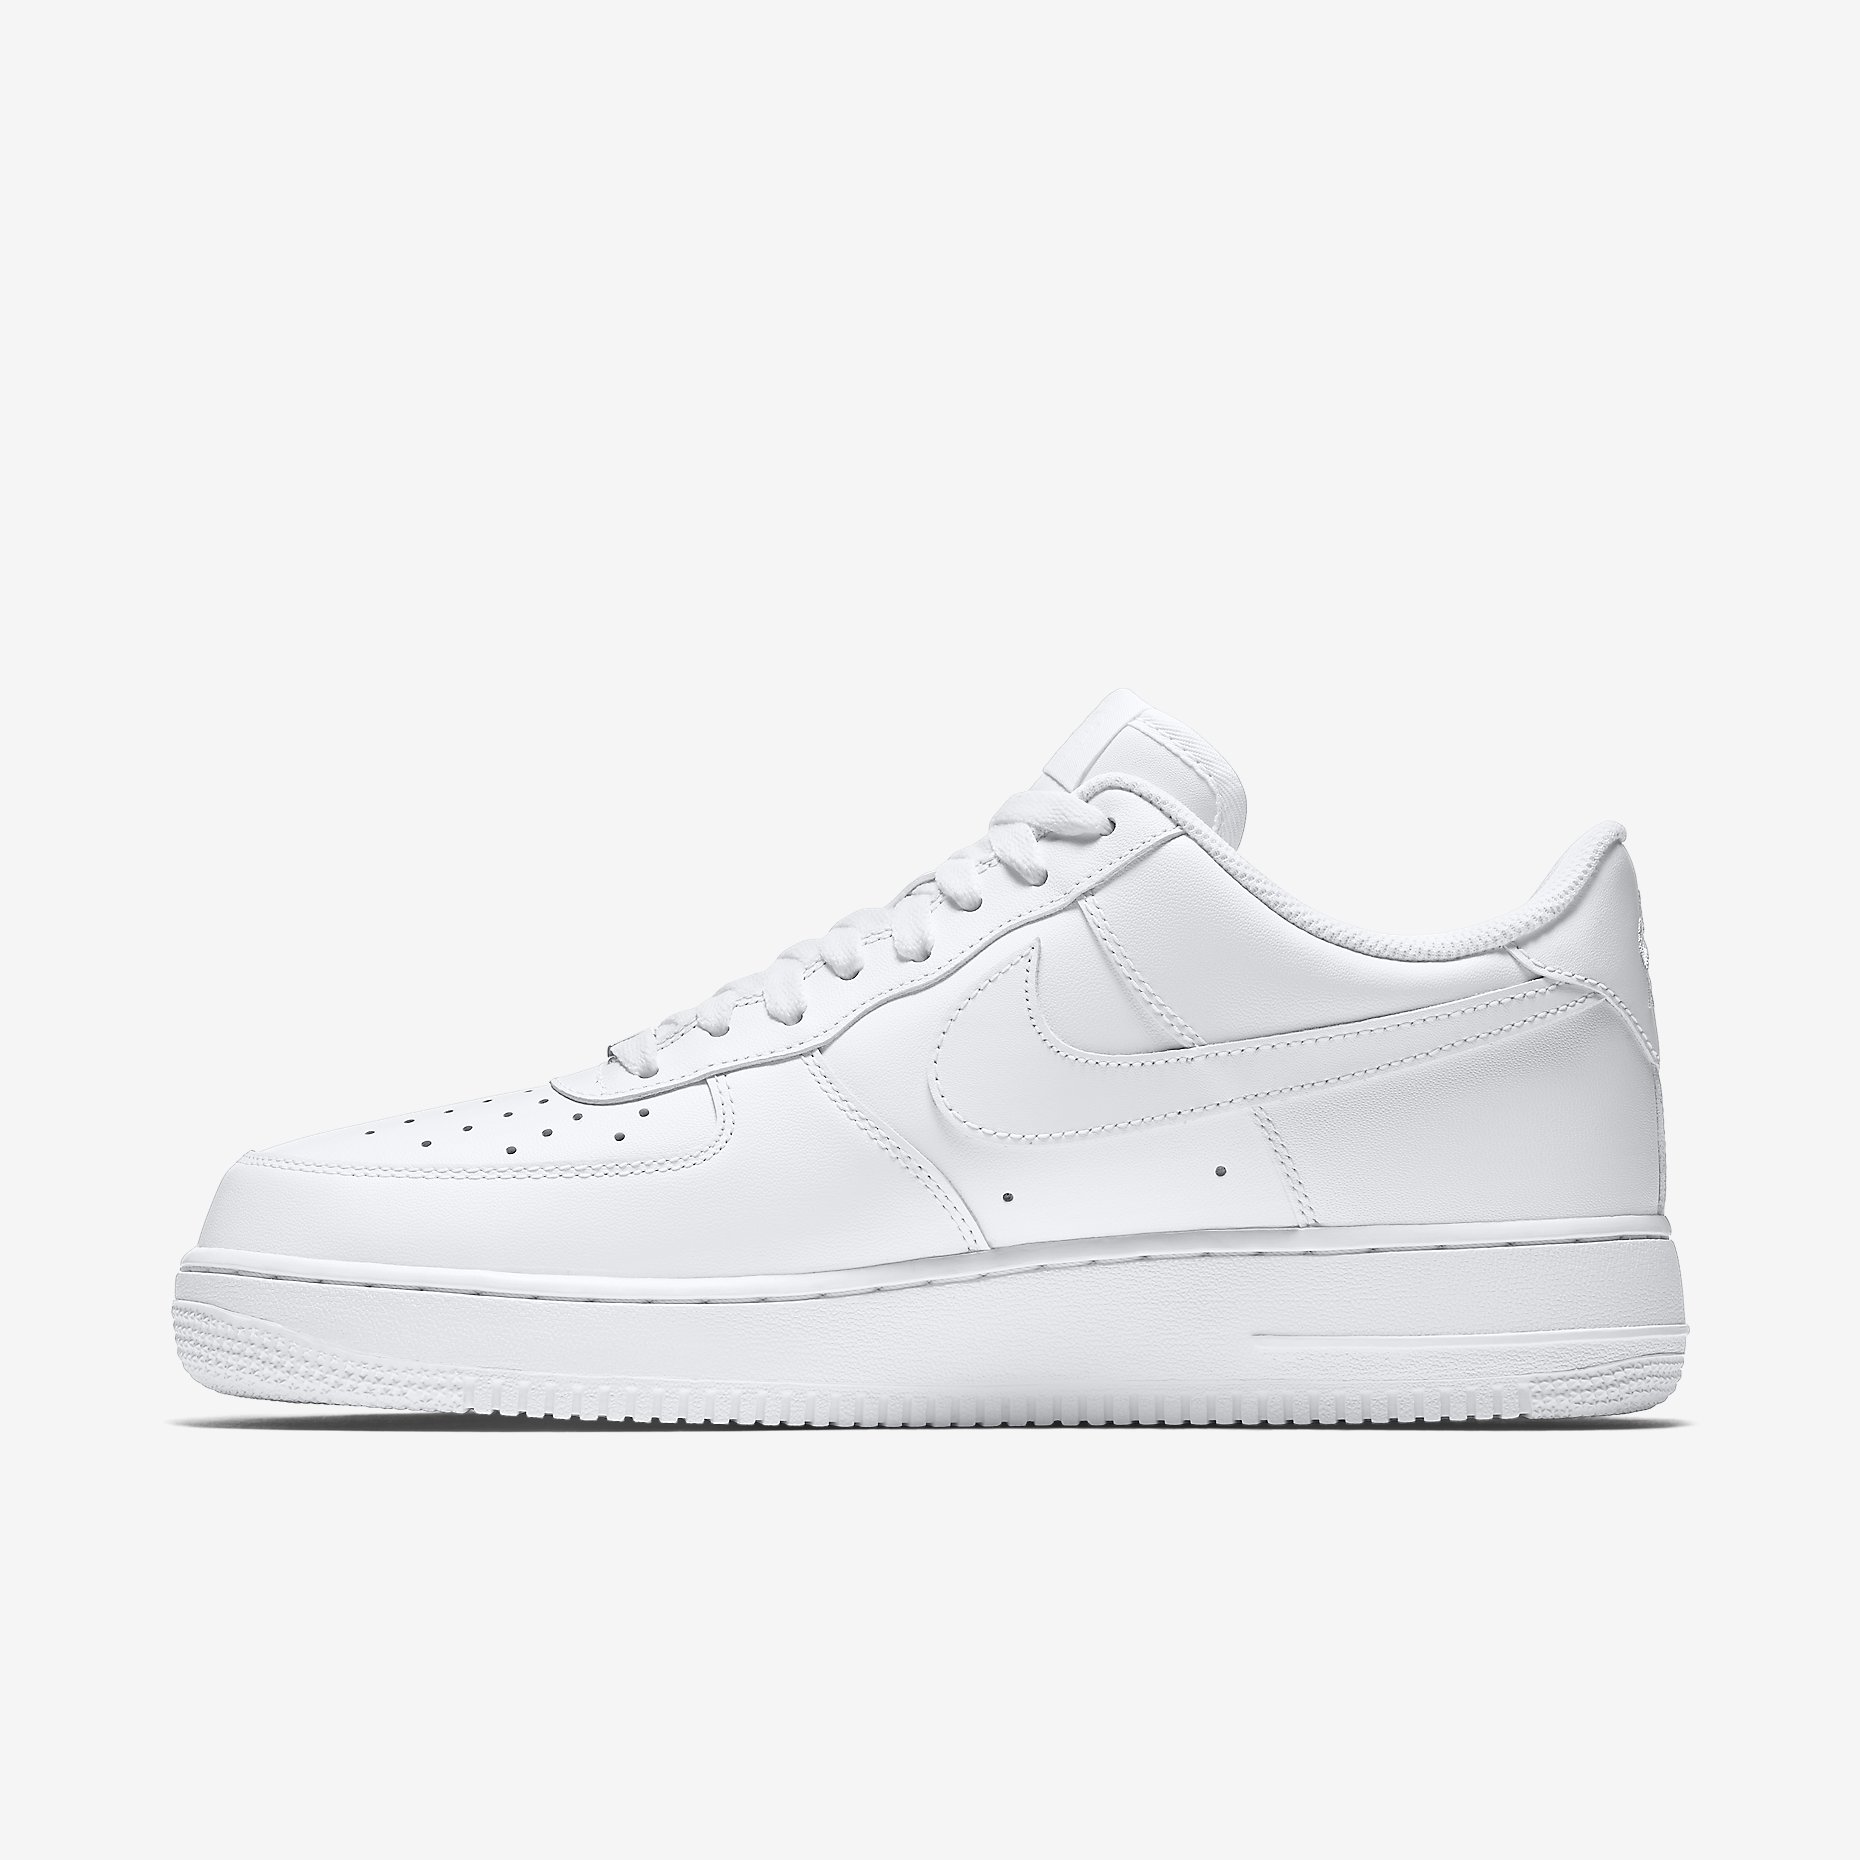 nike-air-force-1-low-white-3